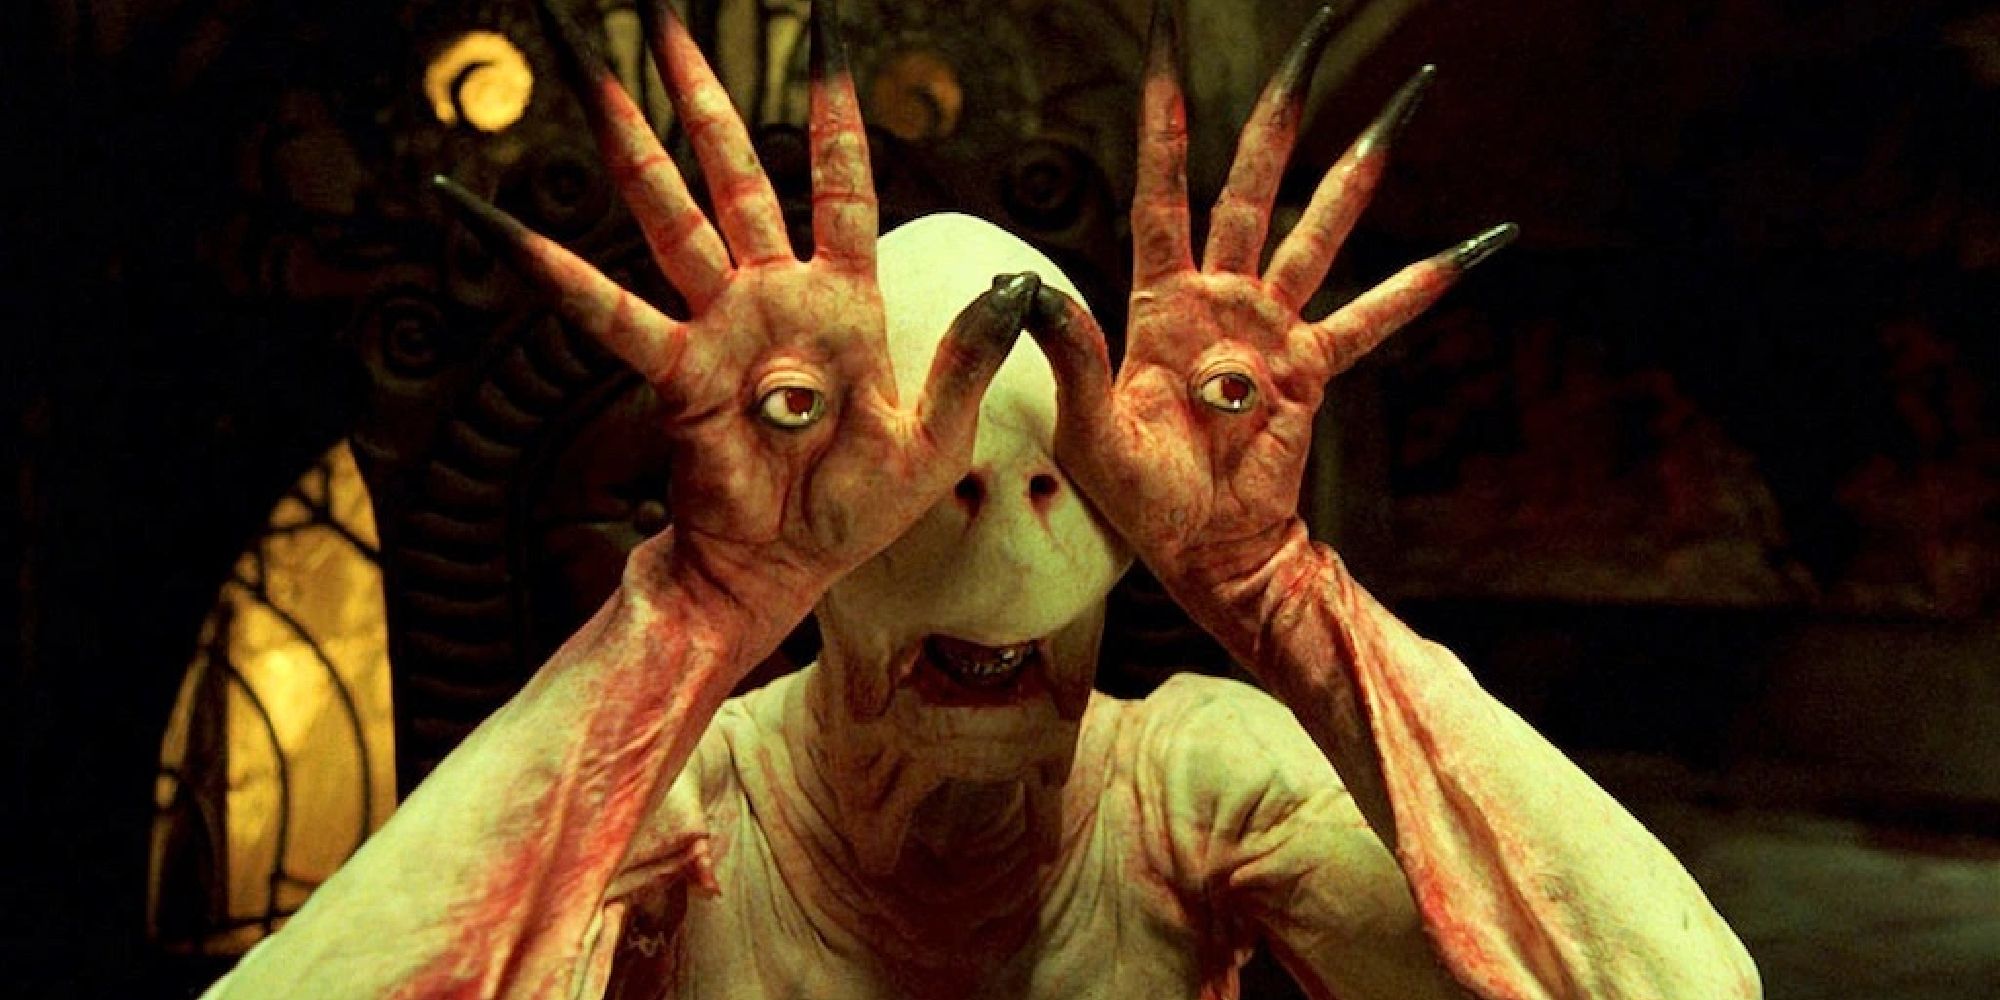 The Pale Man from Pans Labyrinth, looking through the eyes on his palms. 